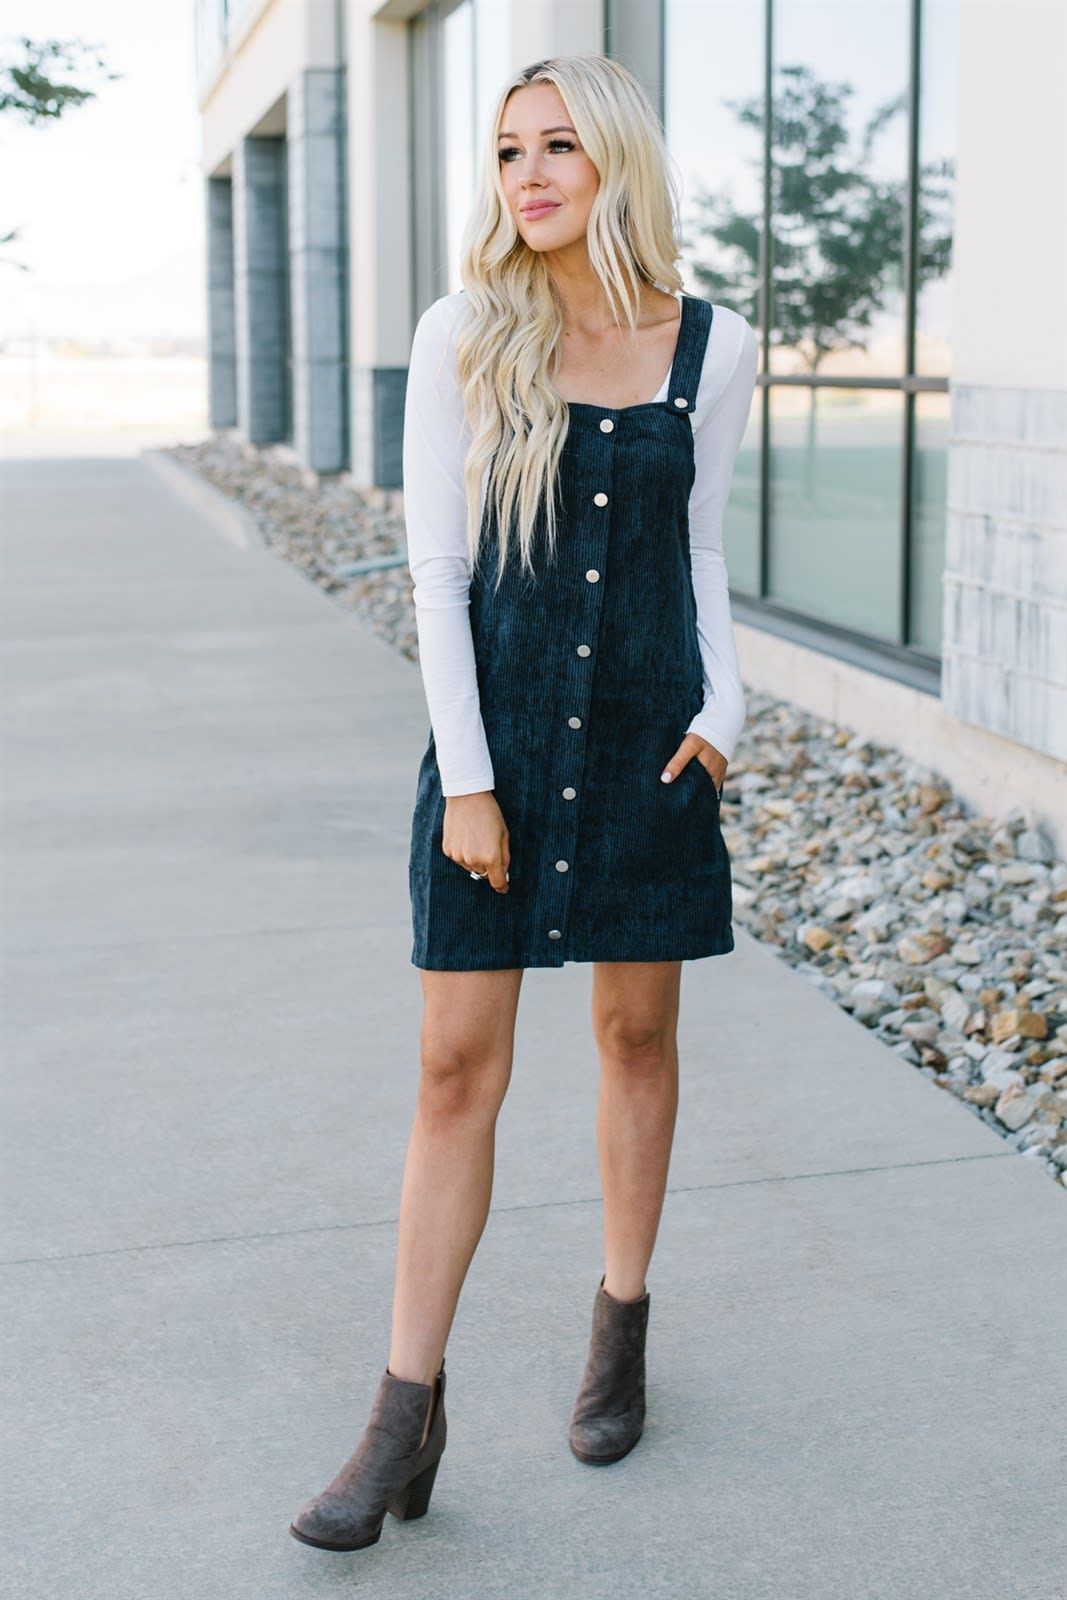 Jumper dress outfit